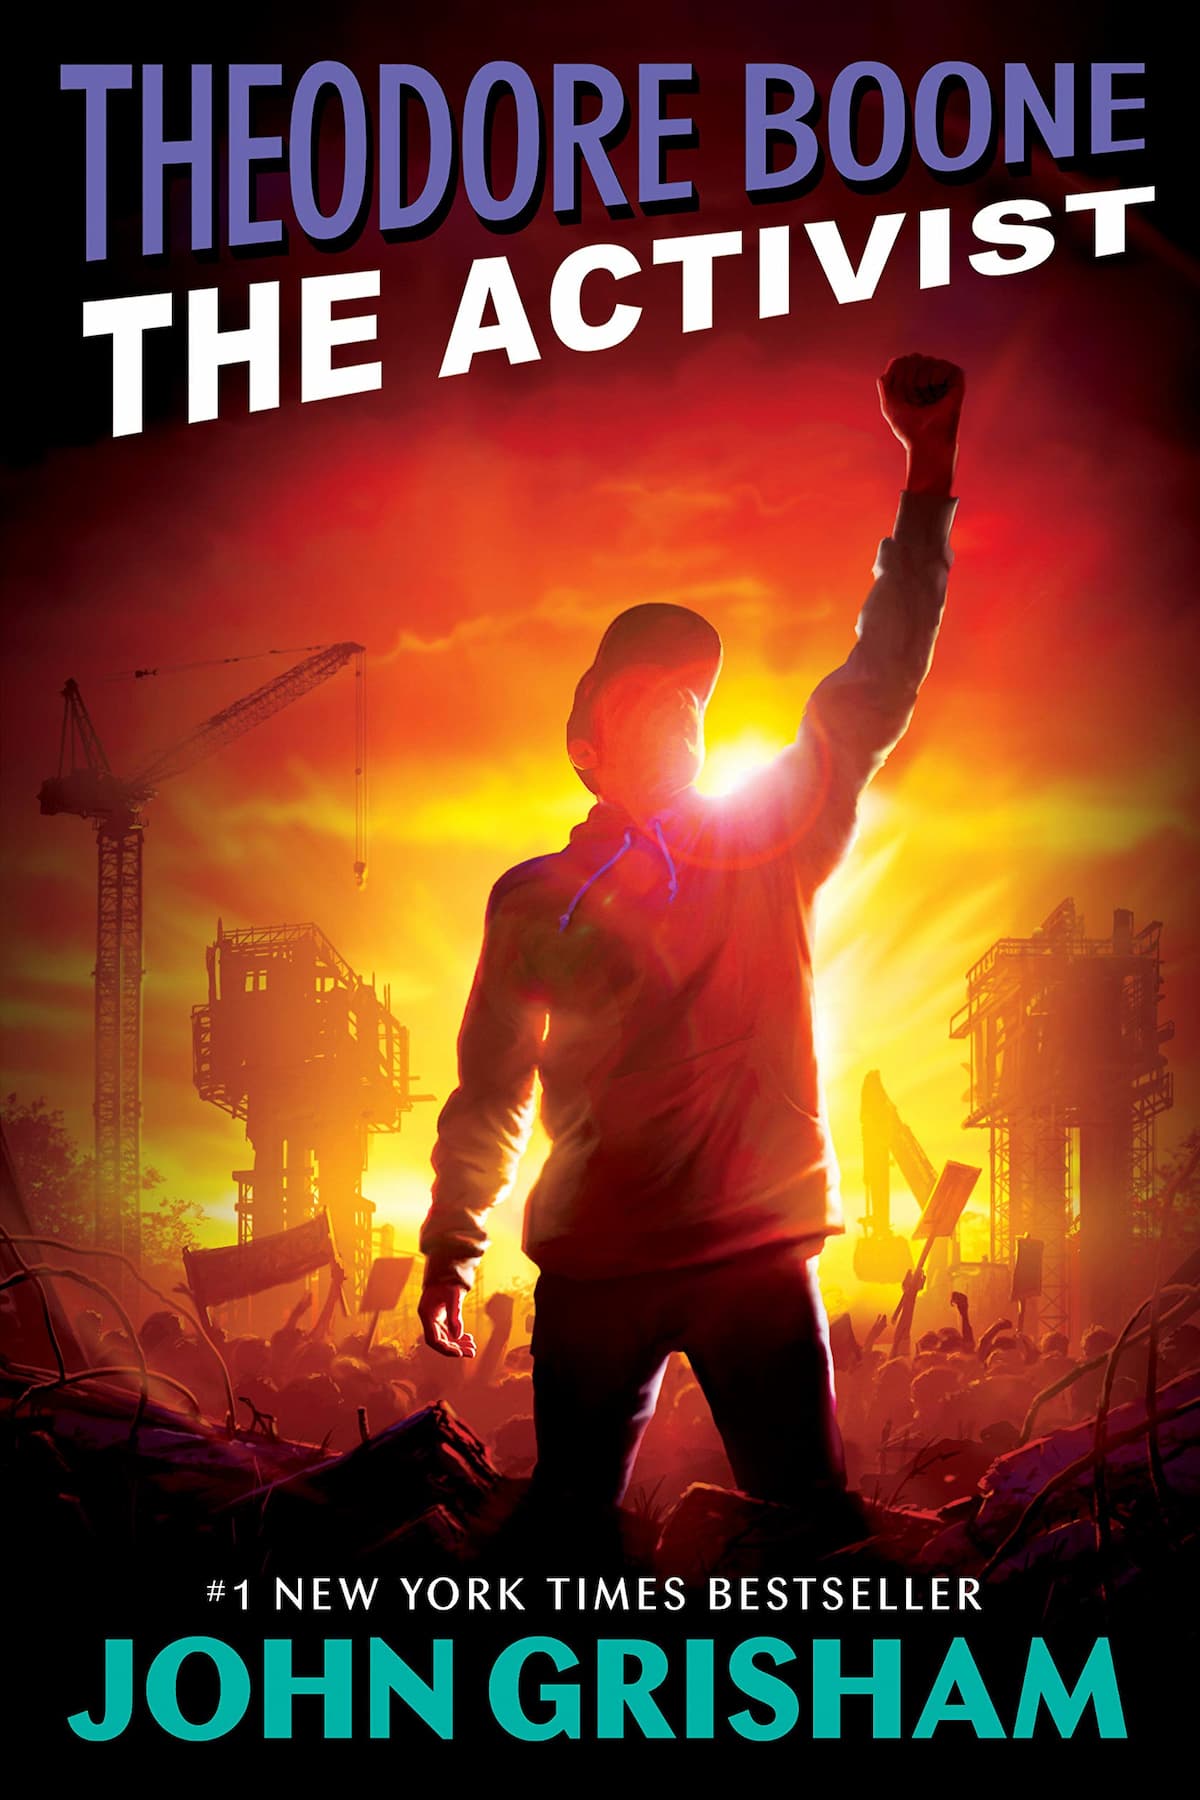 The Activist - John Grisham (Theodore Boone Series Book 4) can be a great help to those who seek to recharge their energy levels during the holidays.